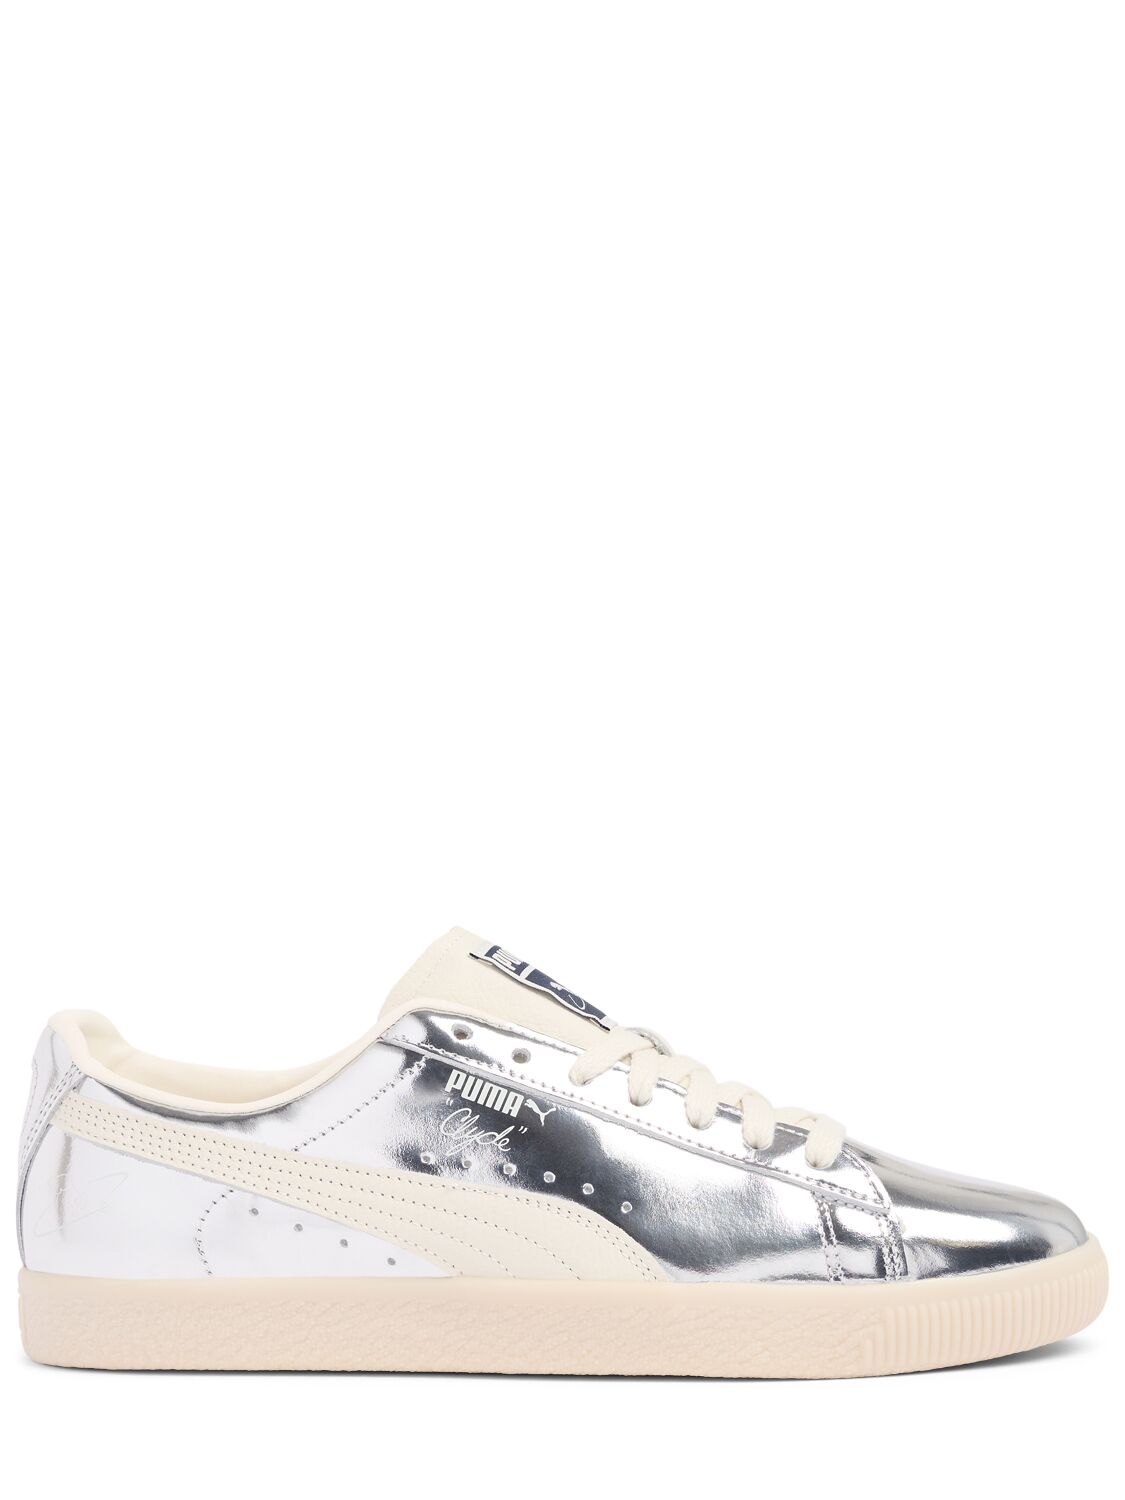 Puma Clyde 3024 Trainers In Silver